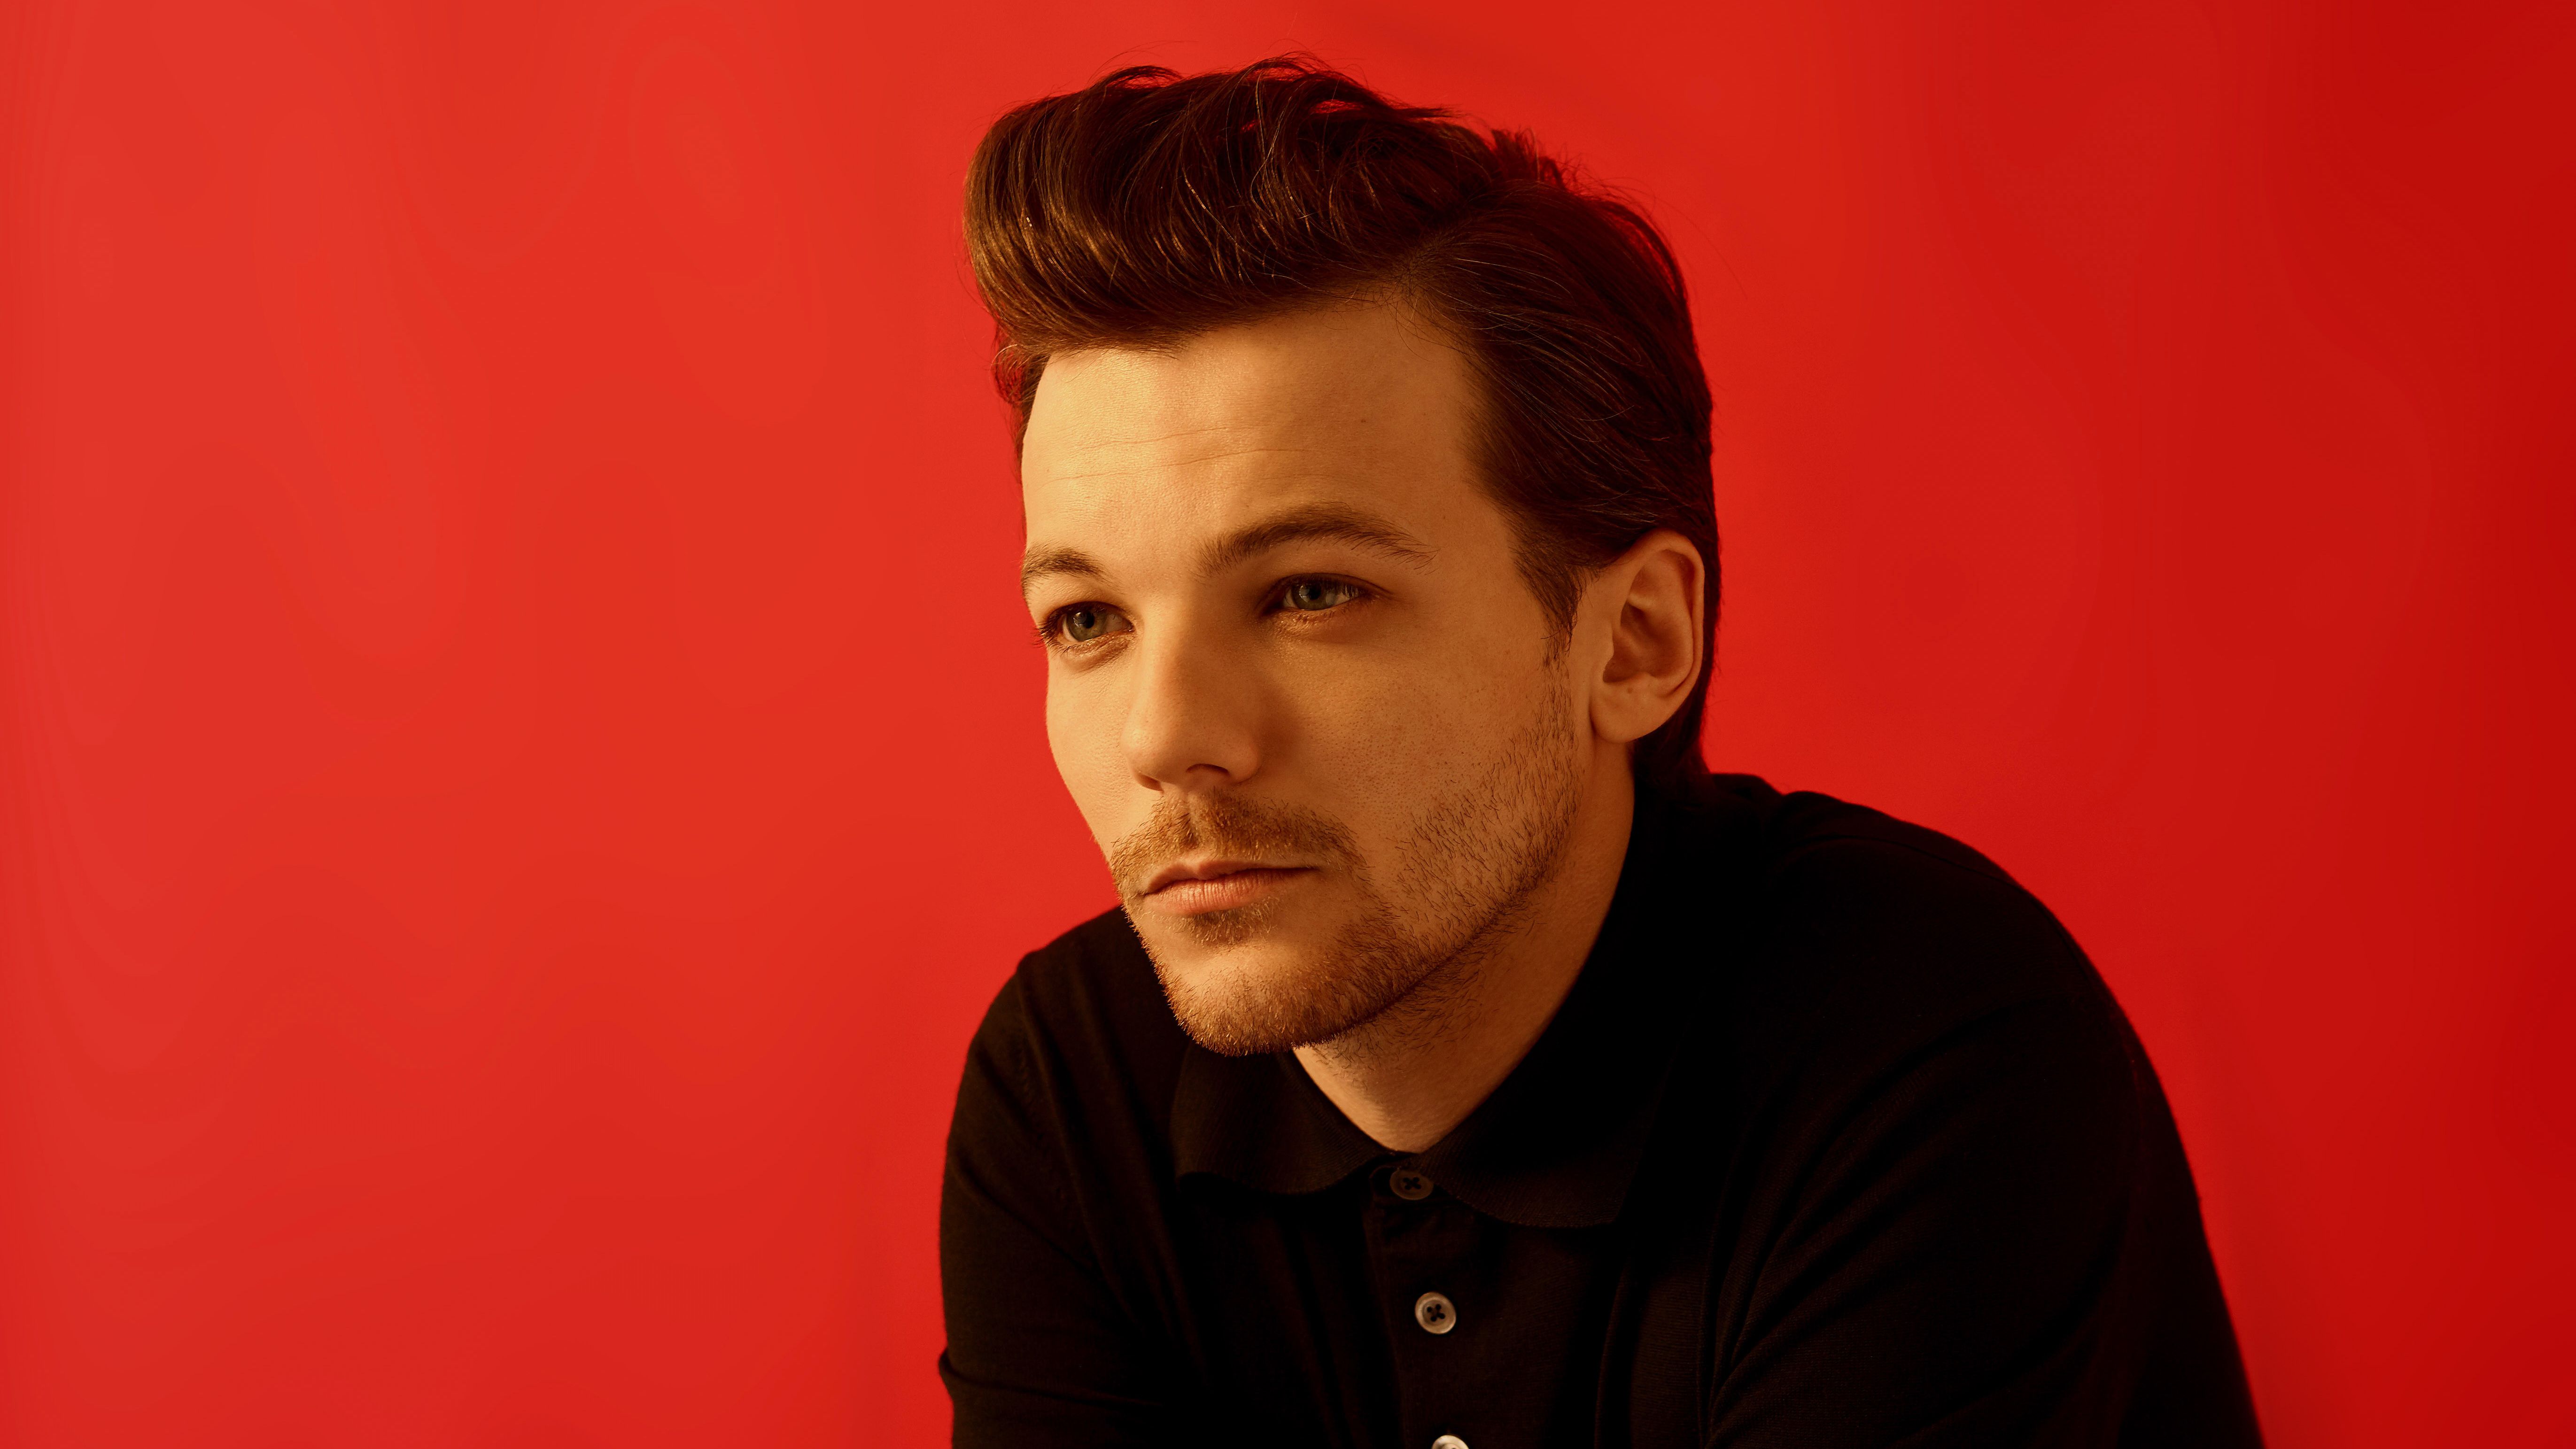 Singer Louis Tomlinson on a red background wallpaper and image, picture, photo